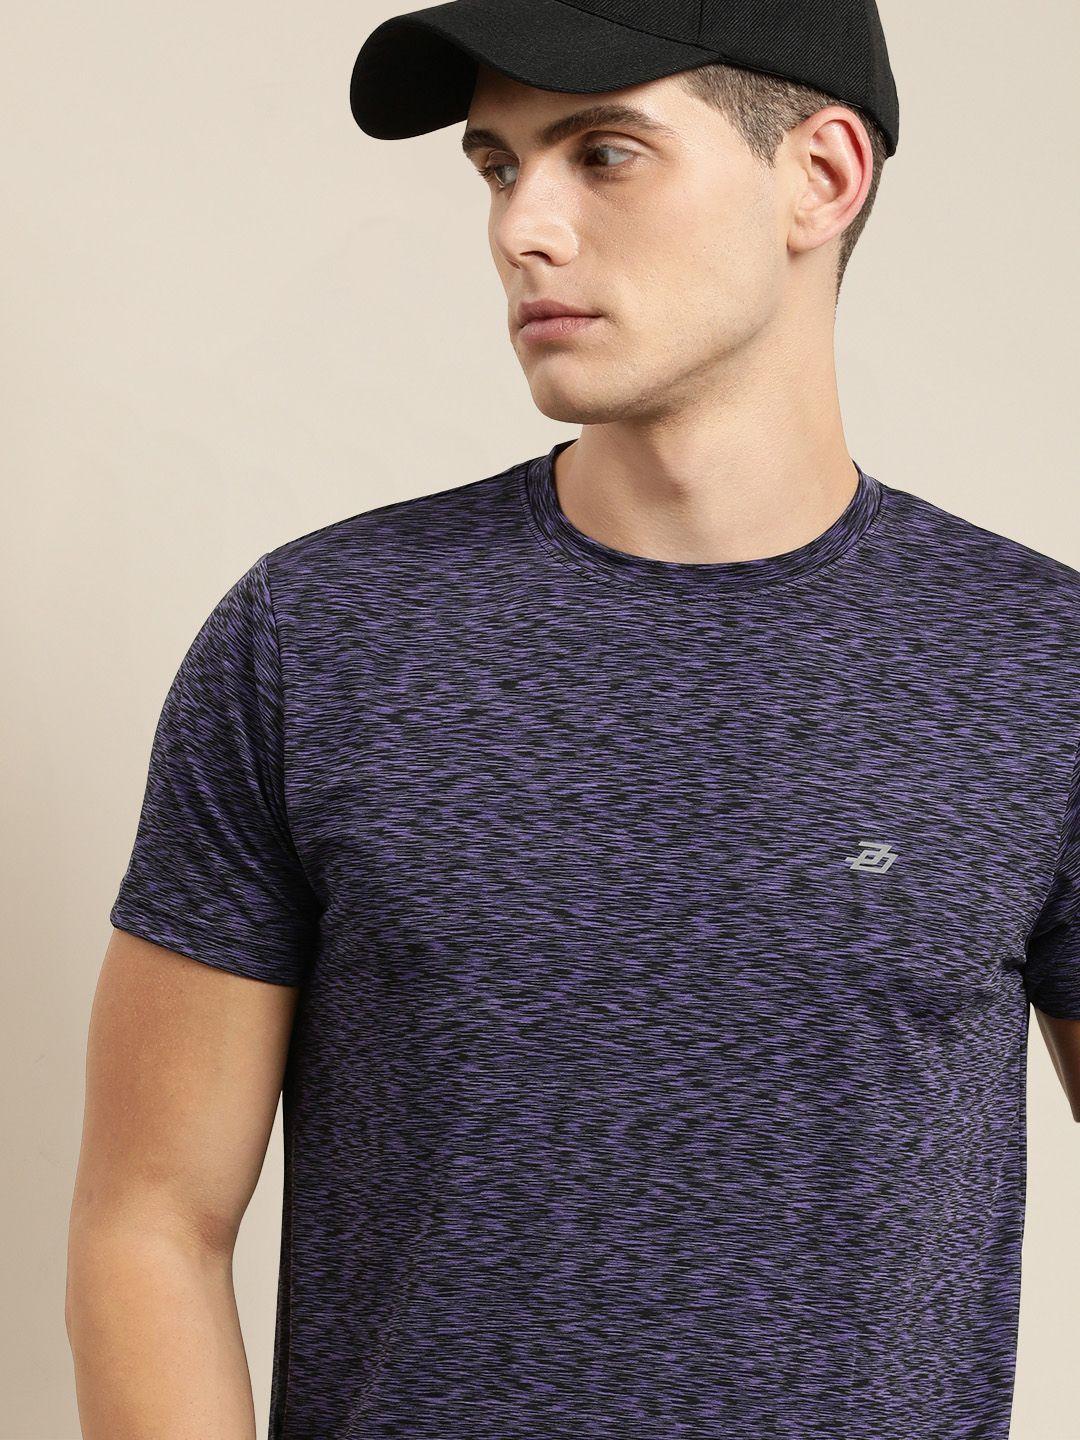 difference of opinion men purple & black abstract printed t-shirt